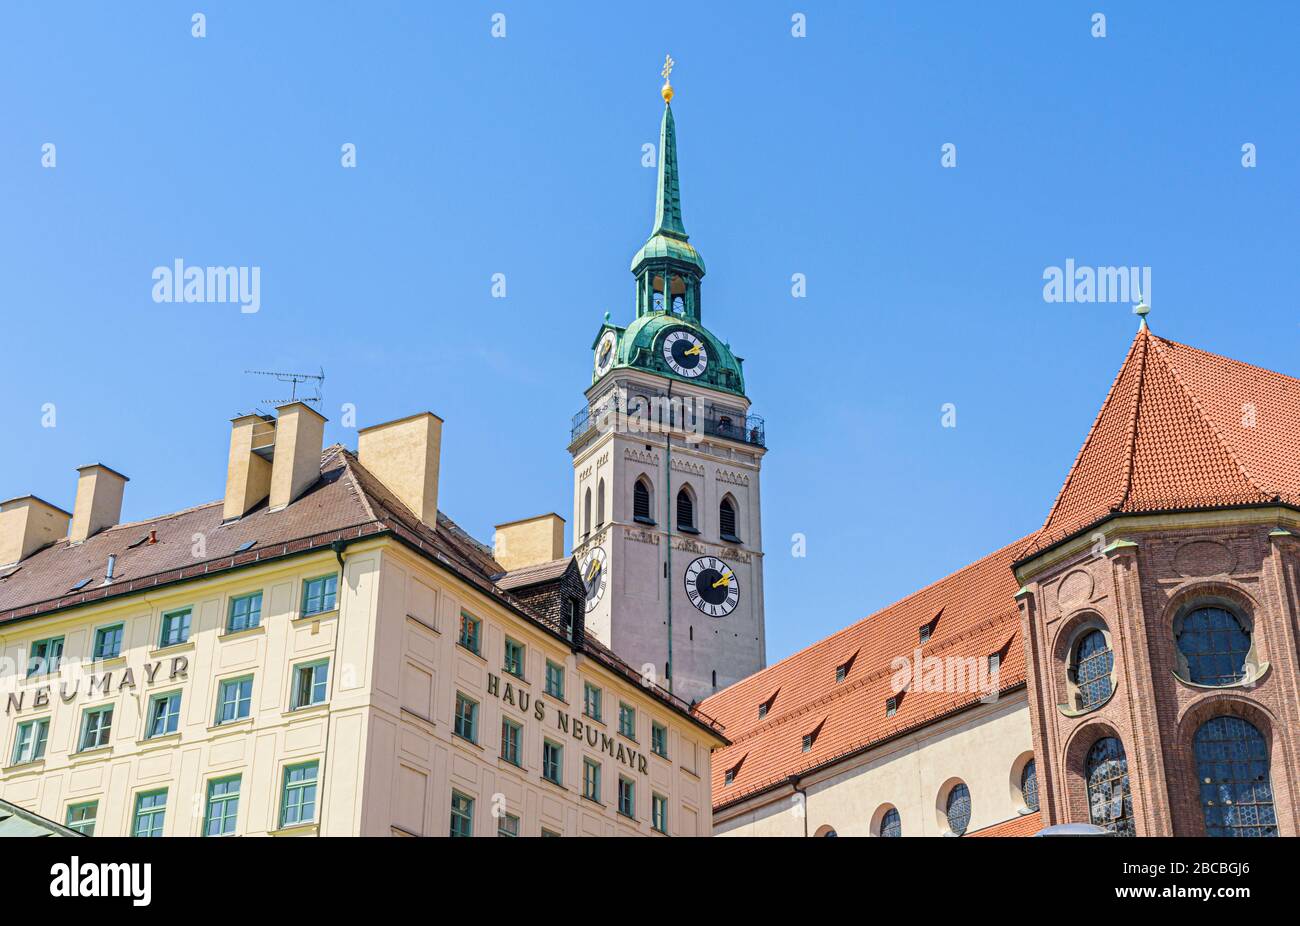 St. Peters Church clock tower overlooking the old town buildings in the centre of Munich, Germany Stock Photo